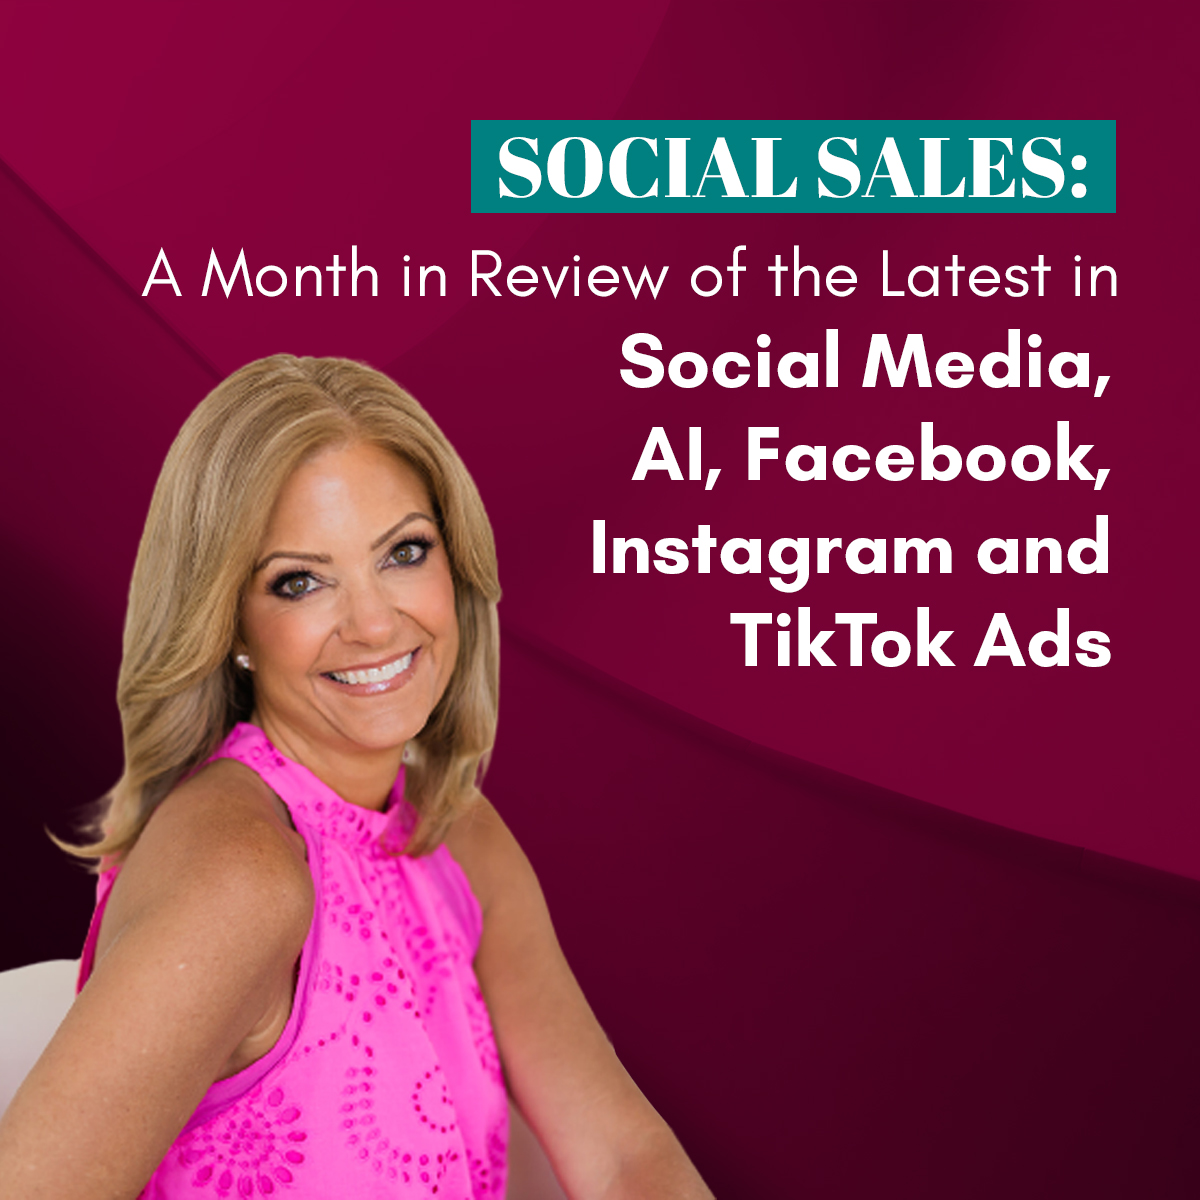 Social Sales: A Month in Review of the Latest in Social Media, AI, Facebook, Instagram, and TikTok Ads